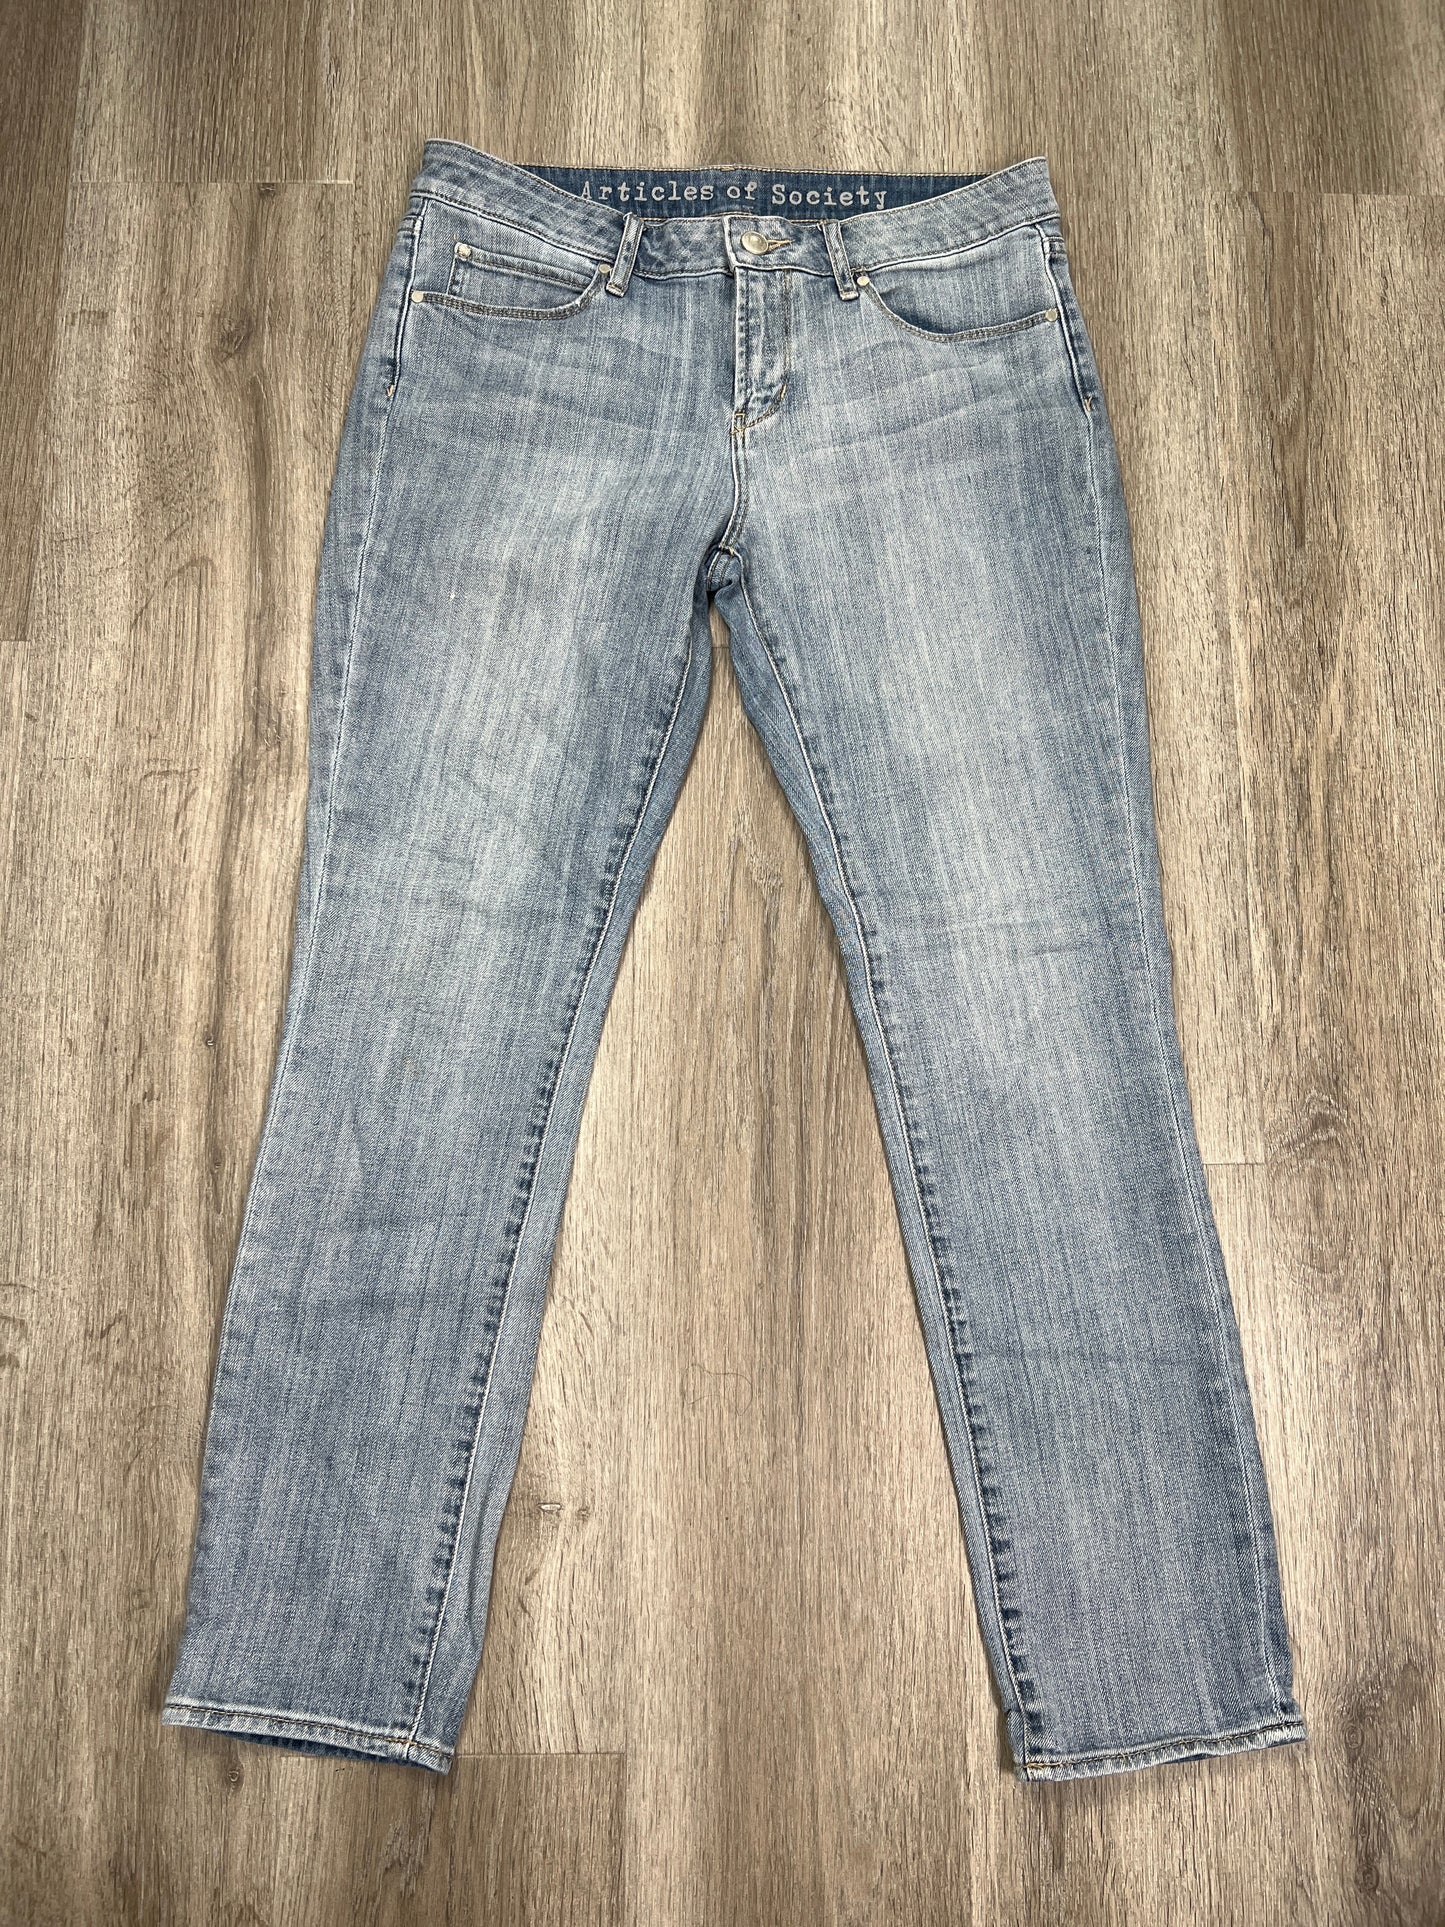 Blue Jeans Cropped Articles Of Society, Size 8